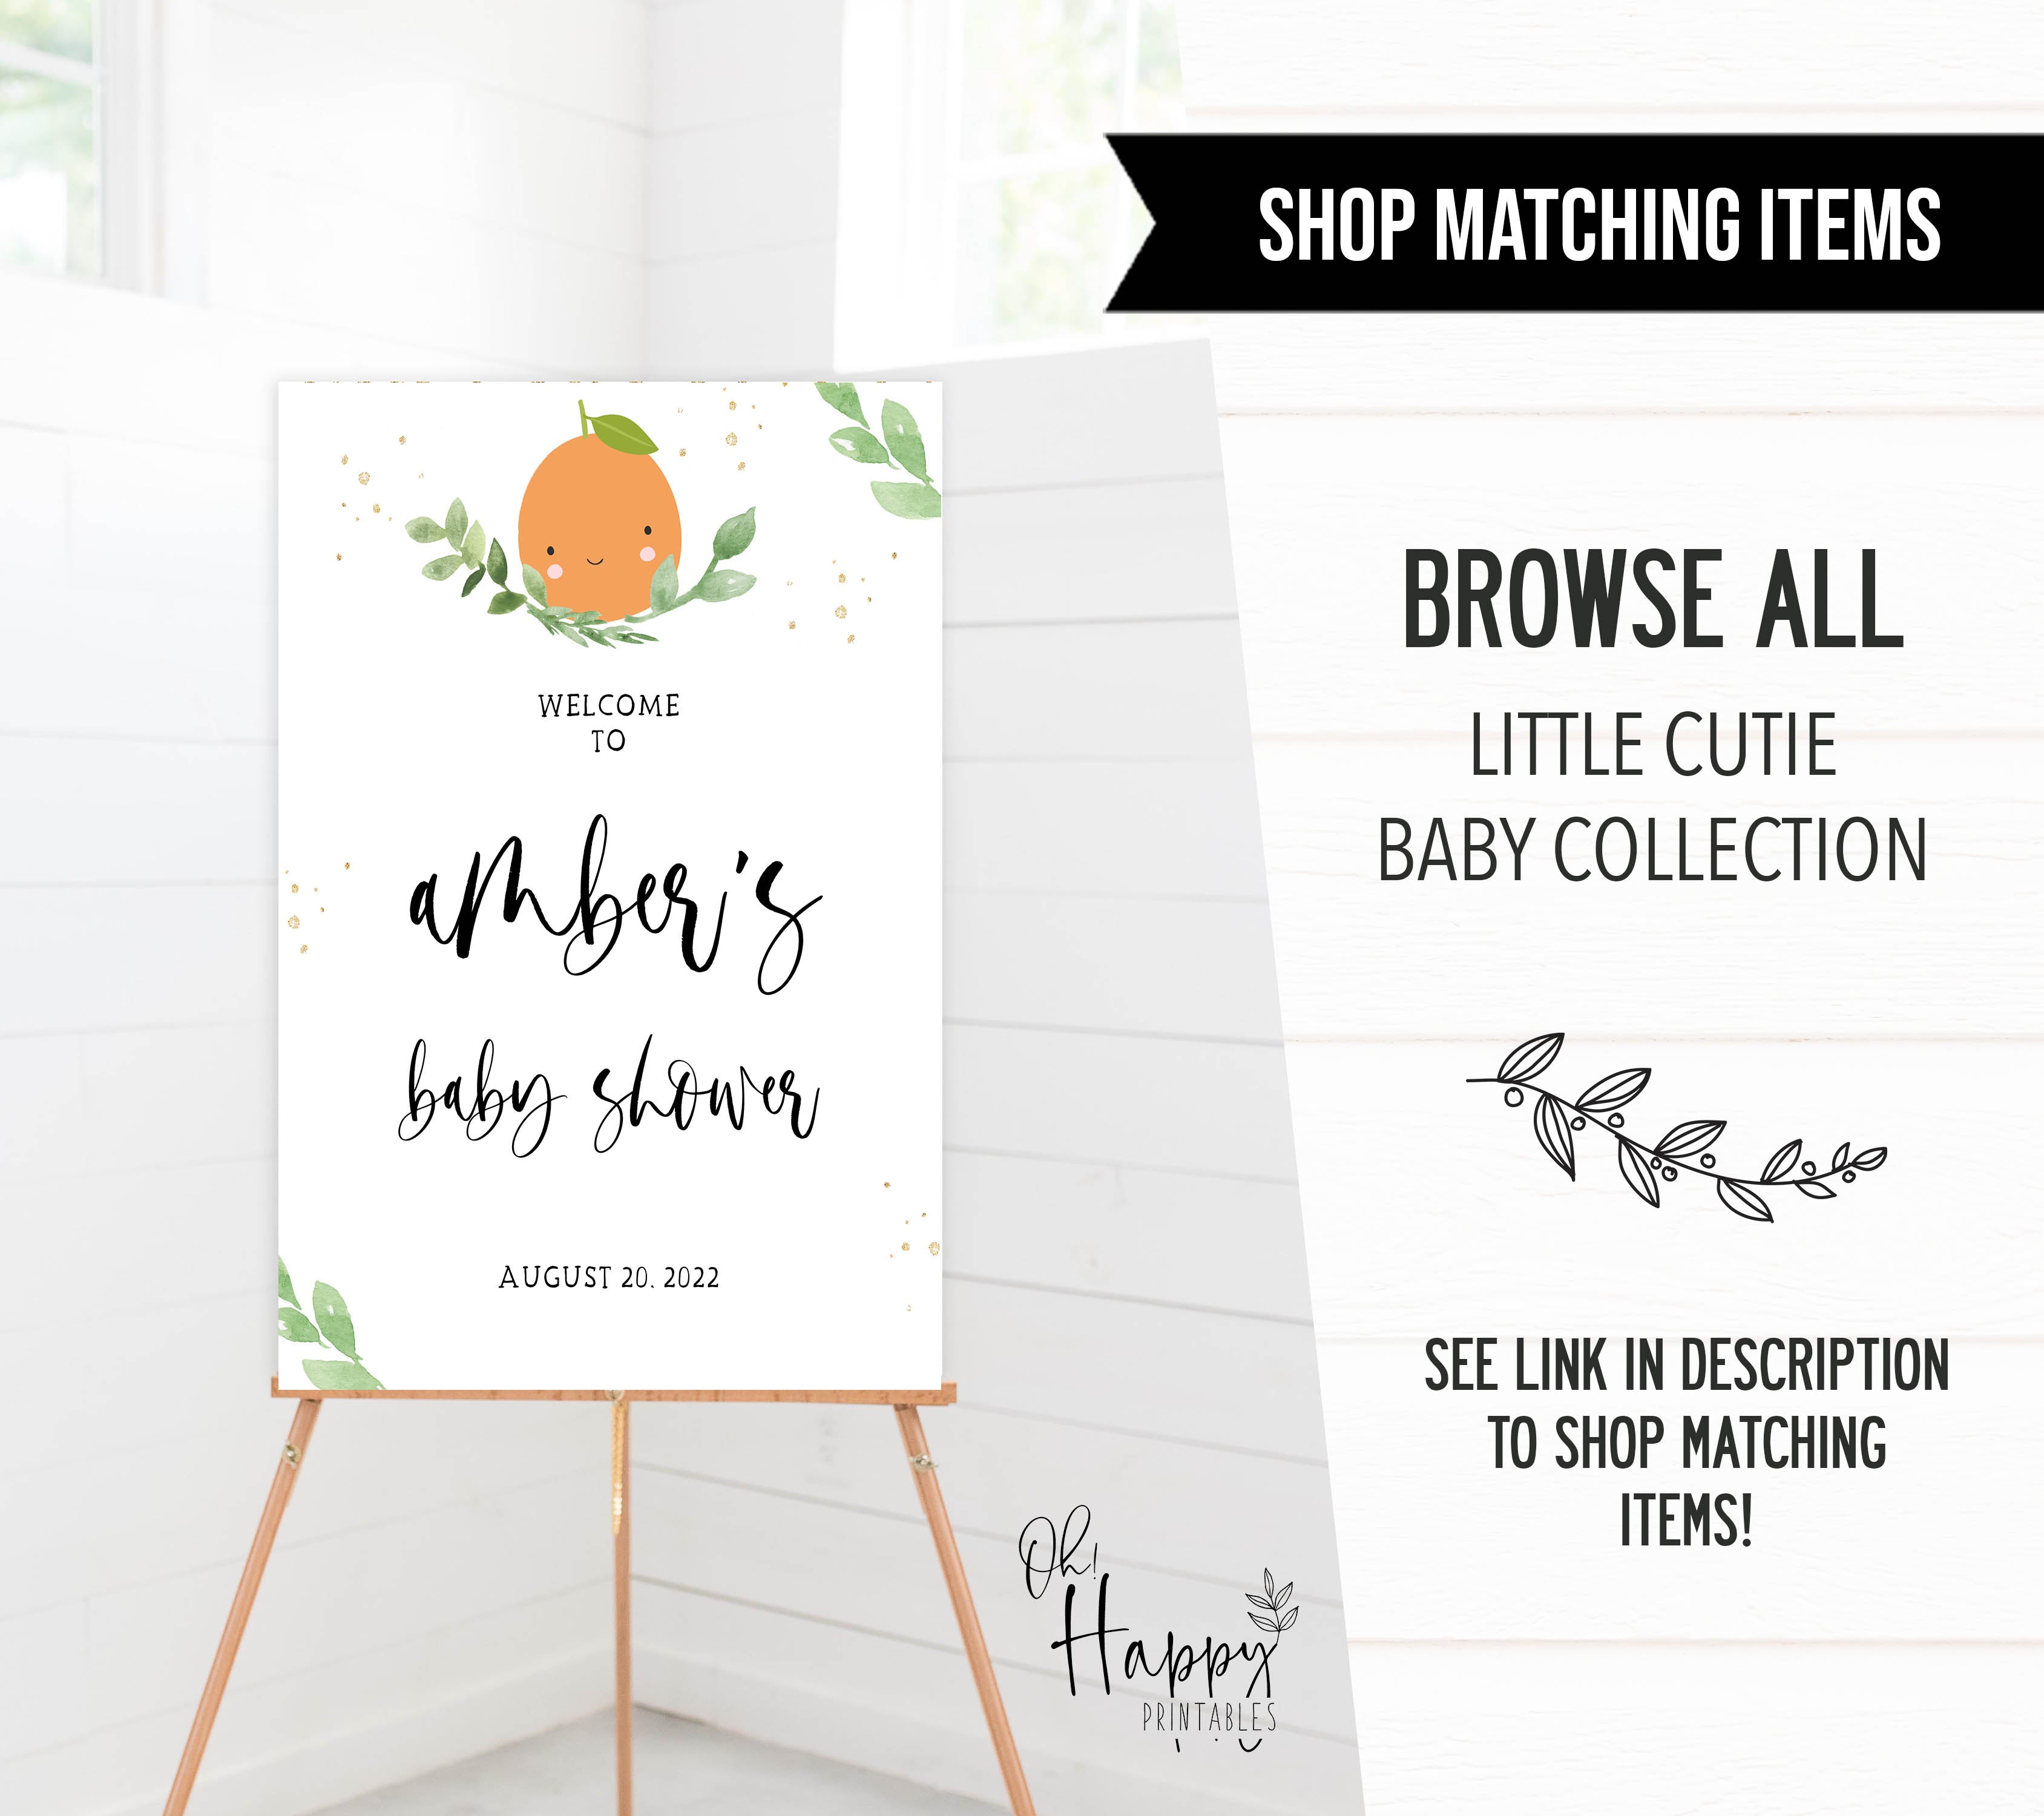 bring a book baby shower game, Printable baby shower games, little cutie baby games, baby shower games, fun baby shower ideas, top baby shower ideas, little cutie baby shower, baby shower games, fun little cutie baby shower ideas